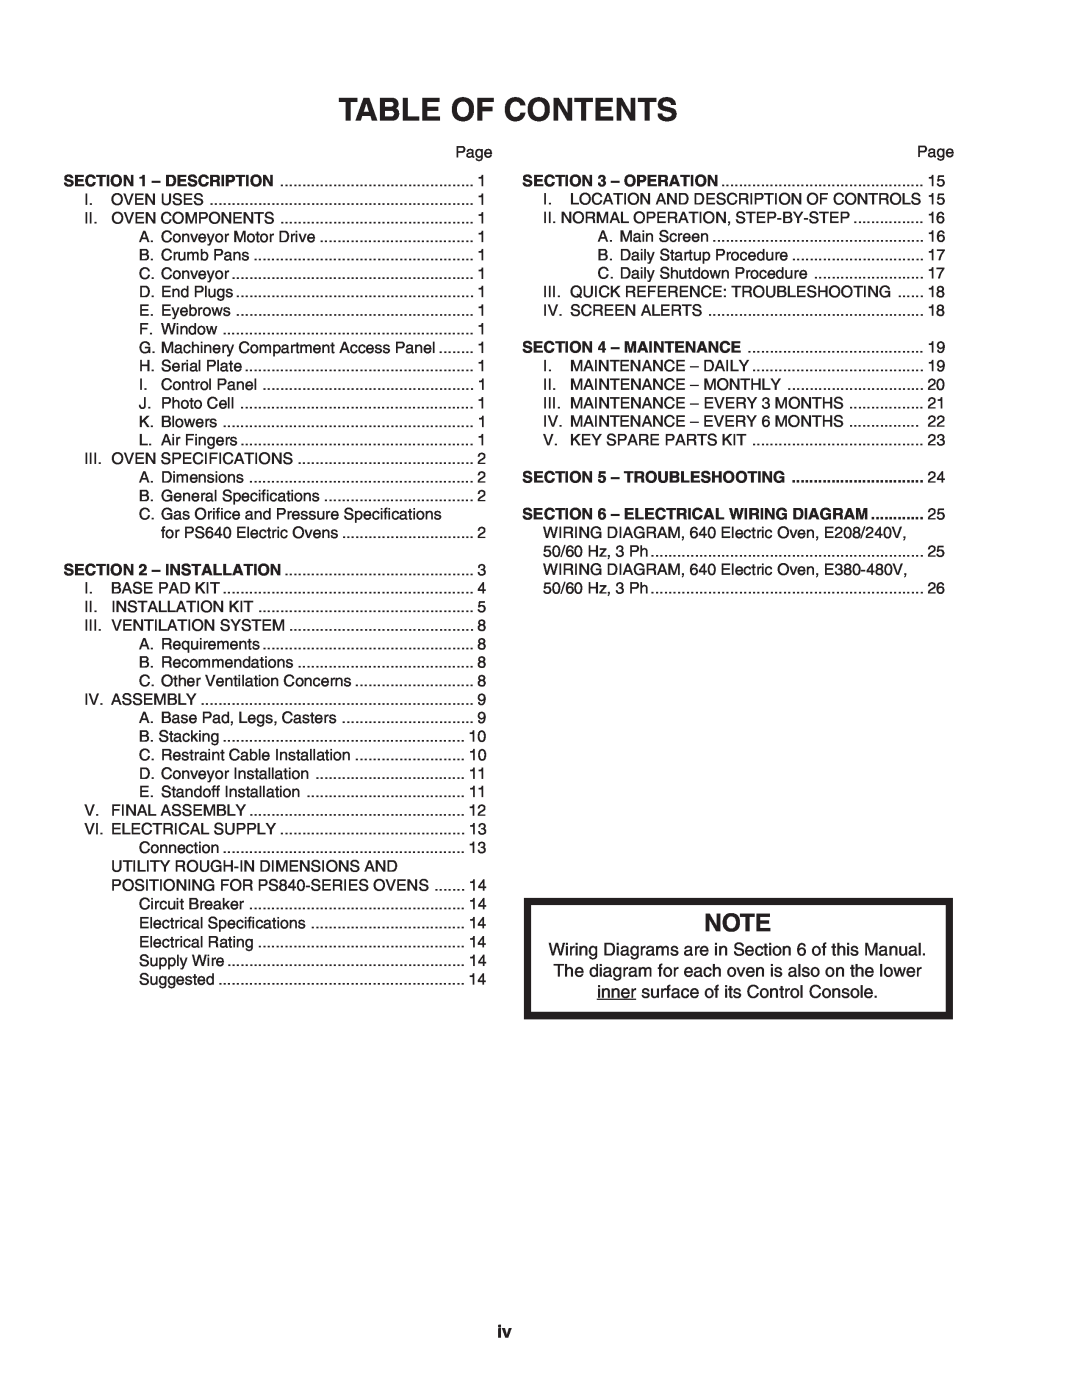 Middleby Marshall PS640E installation manual Table Of Contents, Operation, Troubleshooting, Electrical Wiring Diagram 